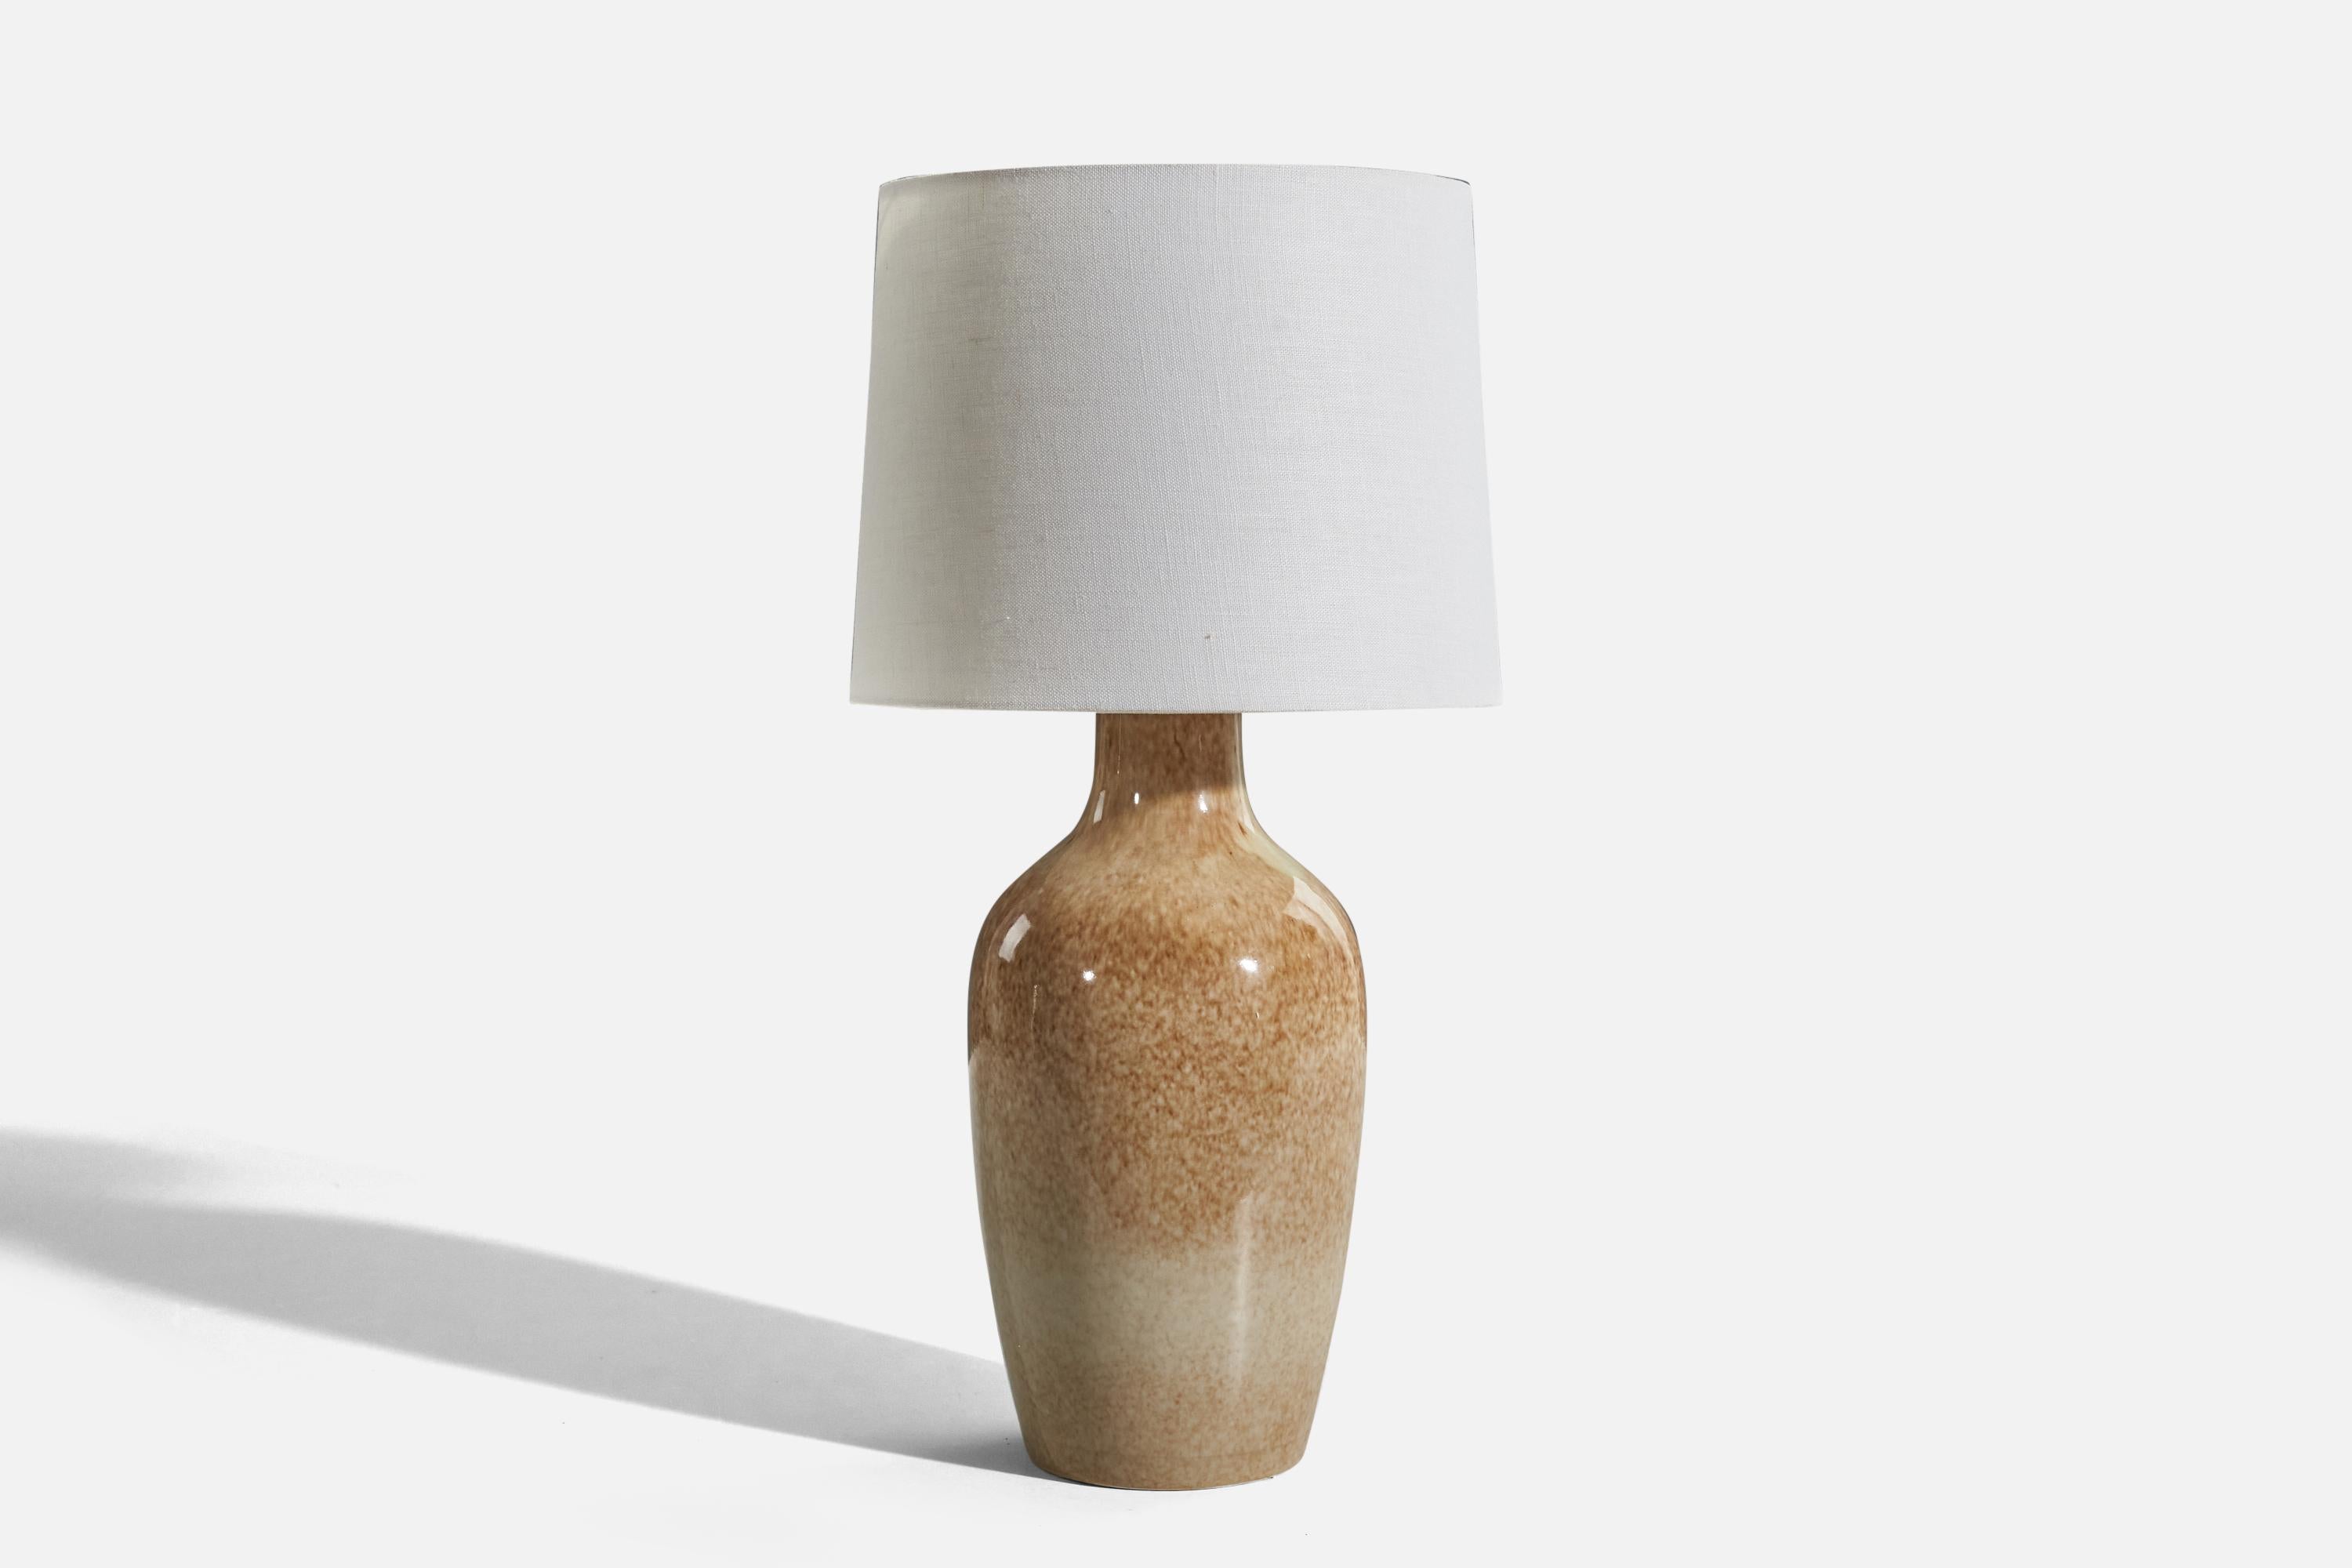 A cream, glazed stoneware table lamp designed and produced by Carl-Harry Stålhane and Kent Eriksson, Sweden, c. 1960s.